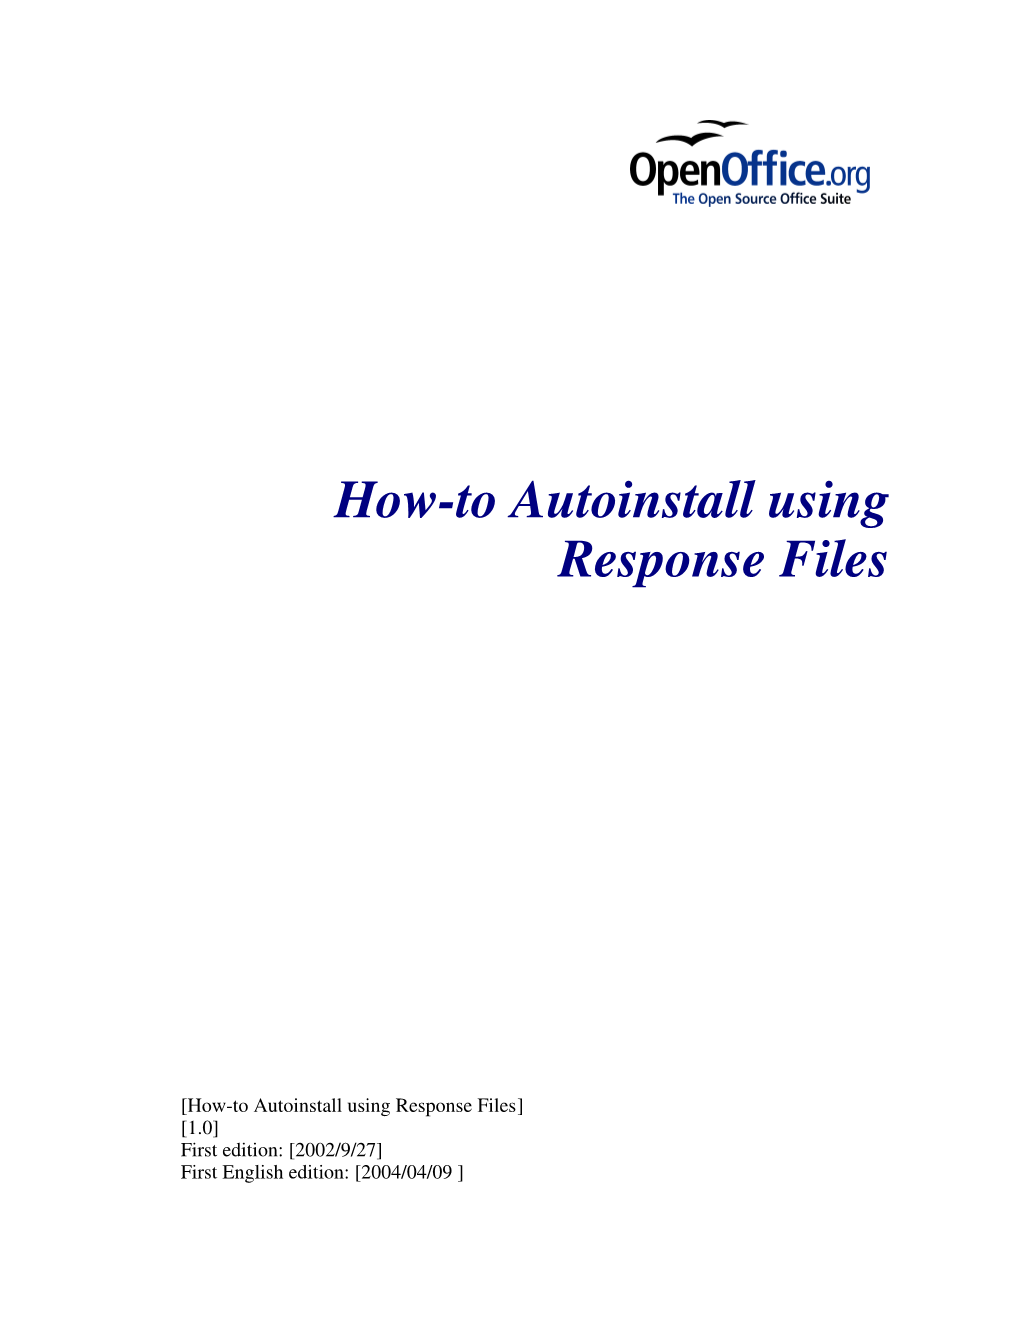 How-To Autoinstall Using Response Files